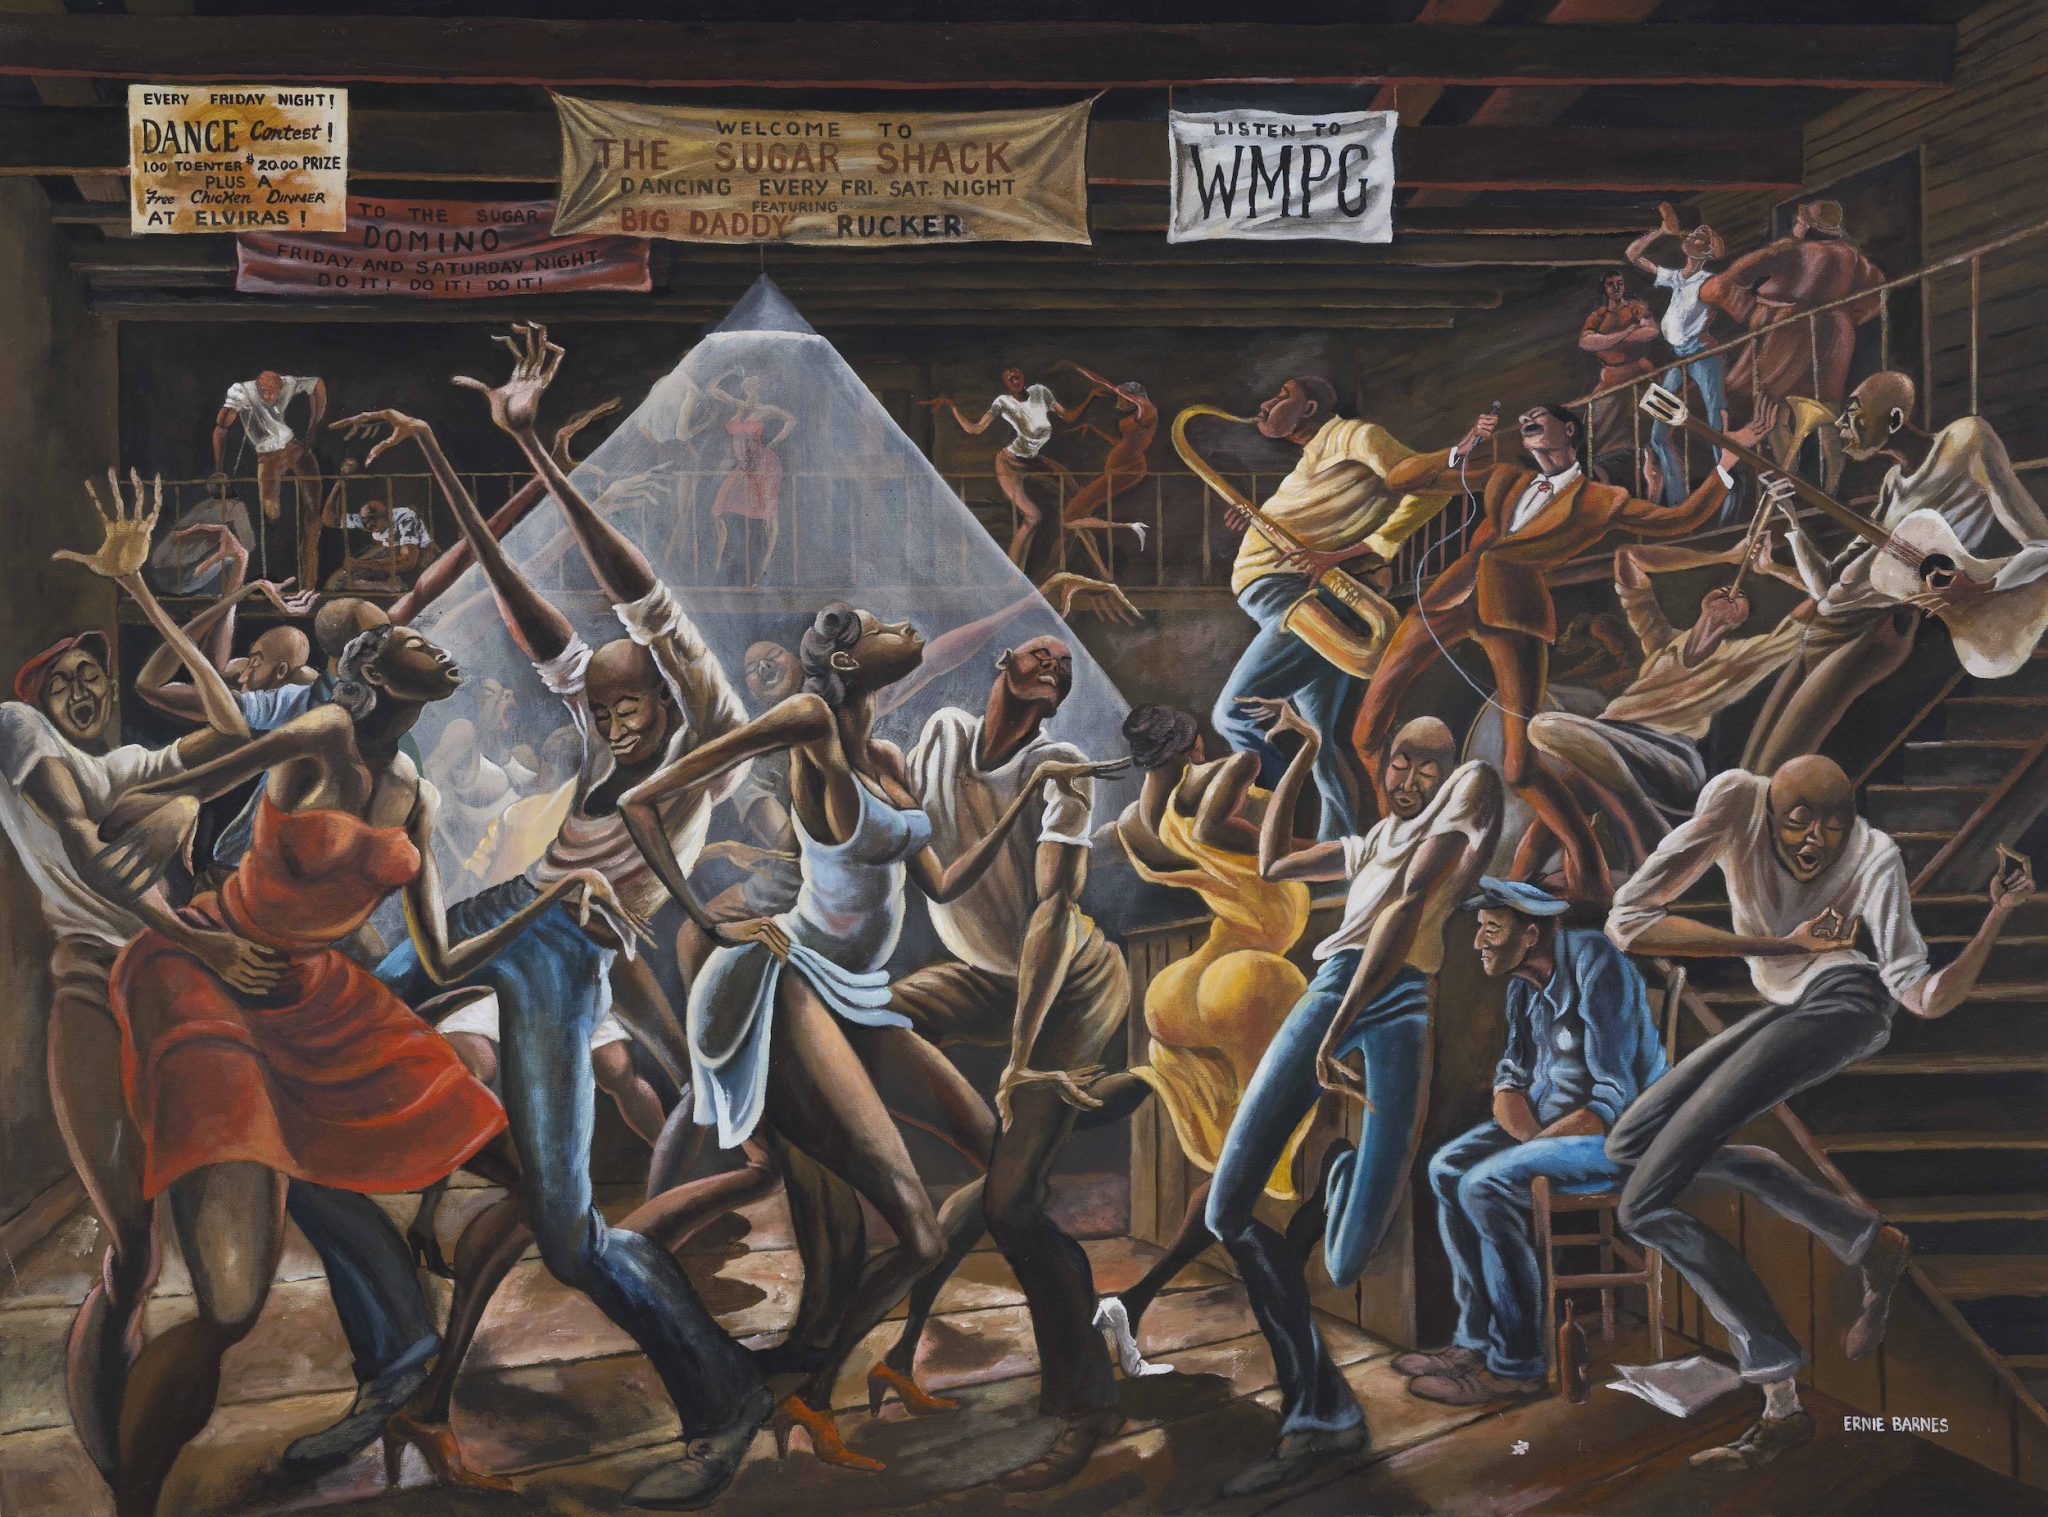 A large painting of several Black people dancing inside a building. In the background are banners, one reading "Welcome to the Sugar Shack"